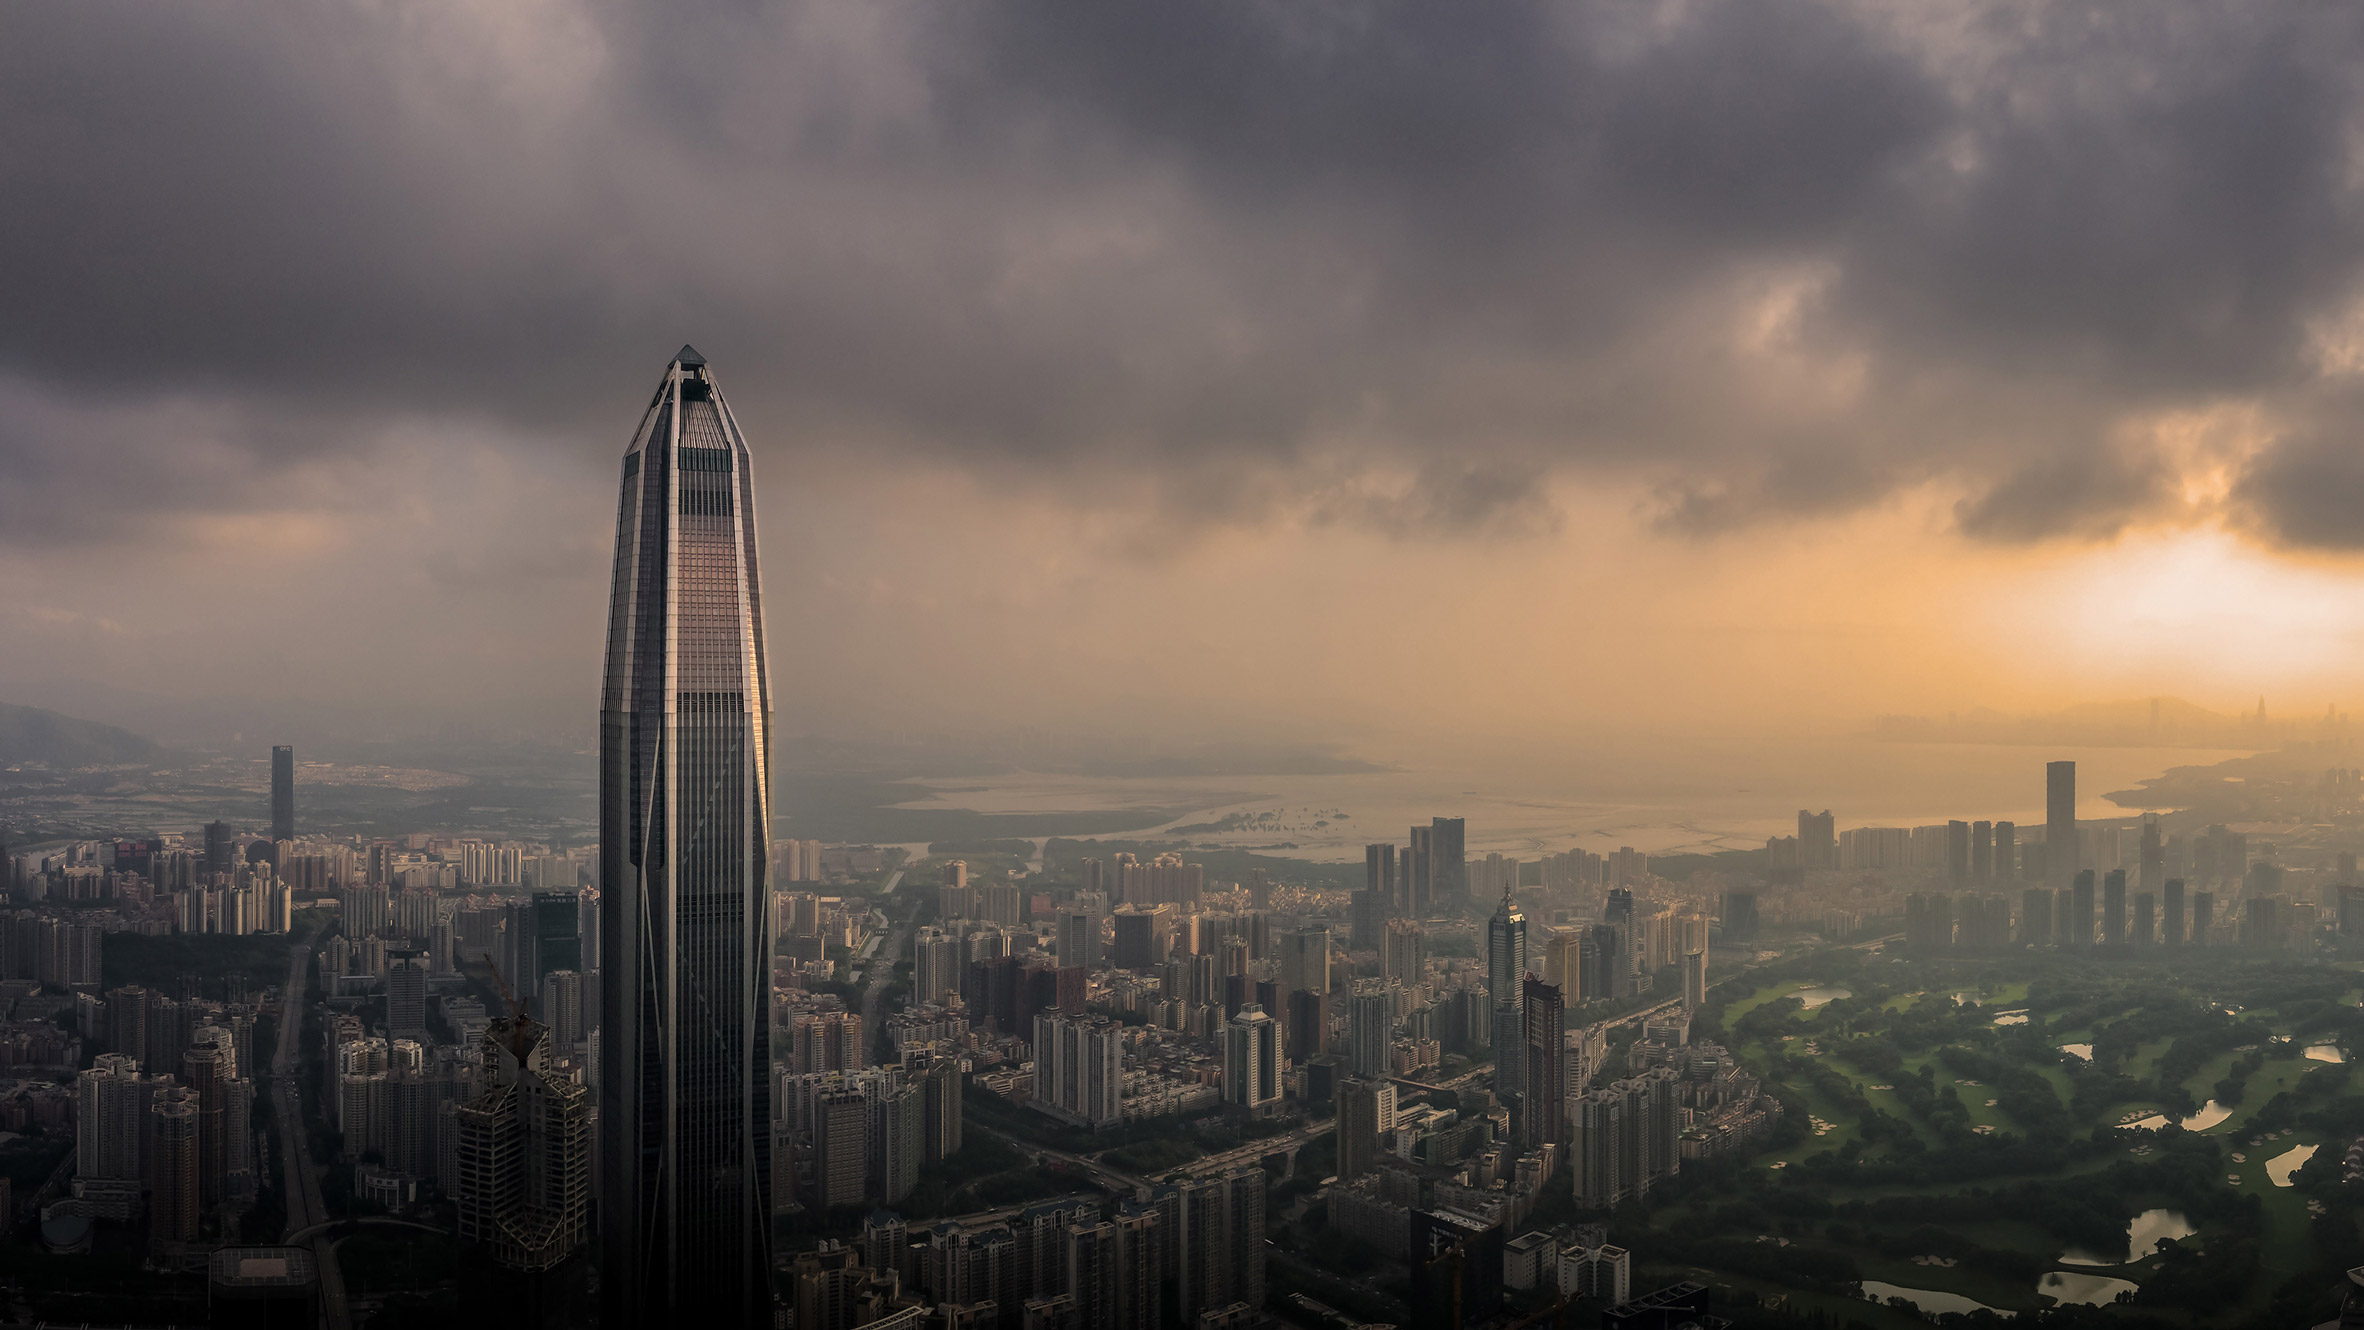 KPF's Shenzhen skyscraper is now fourth tallest in the world